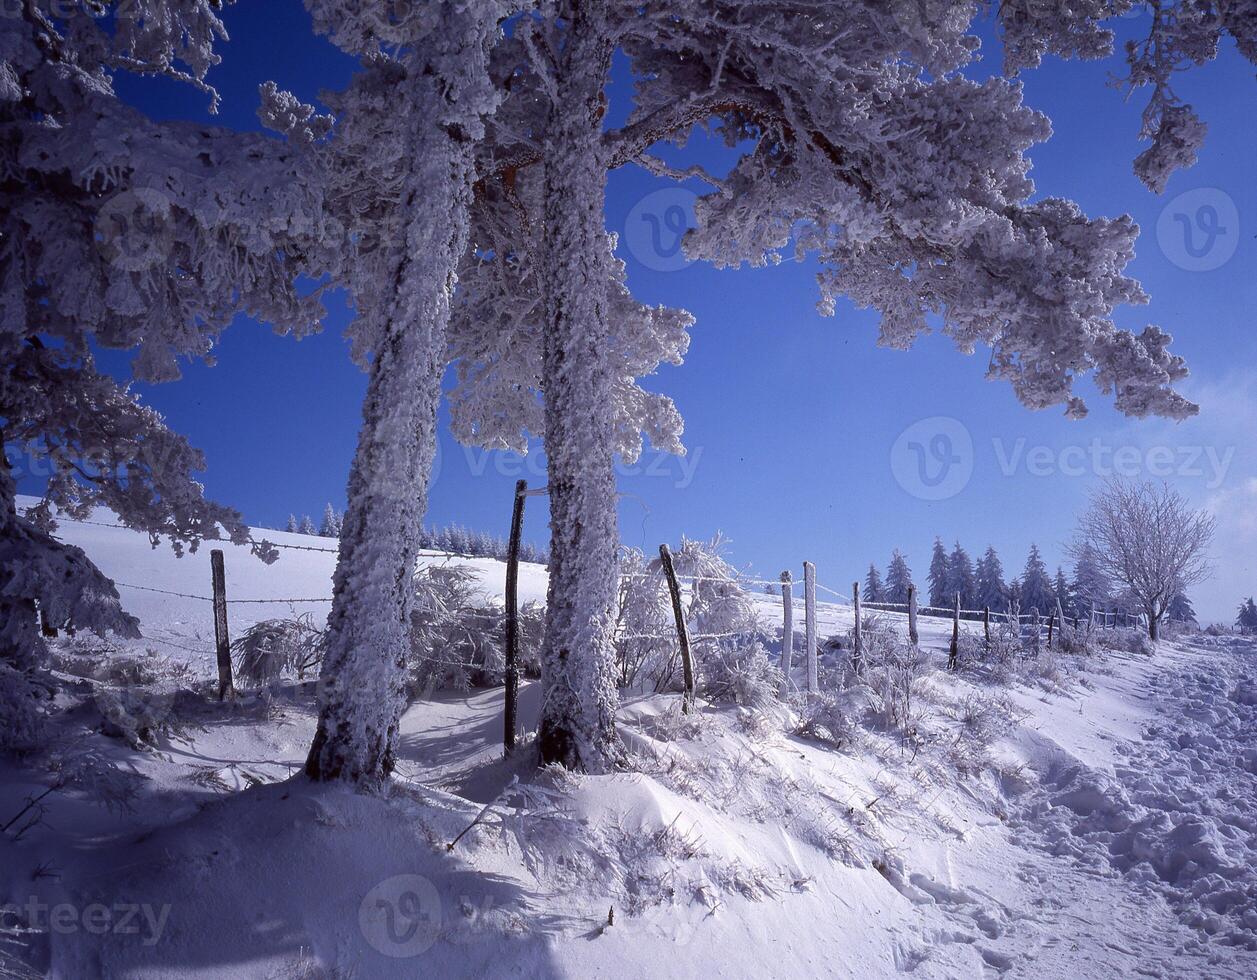 a snowy landscape with trees and a fence photo